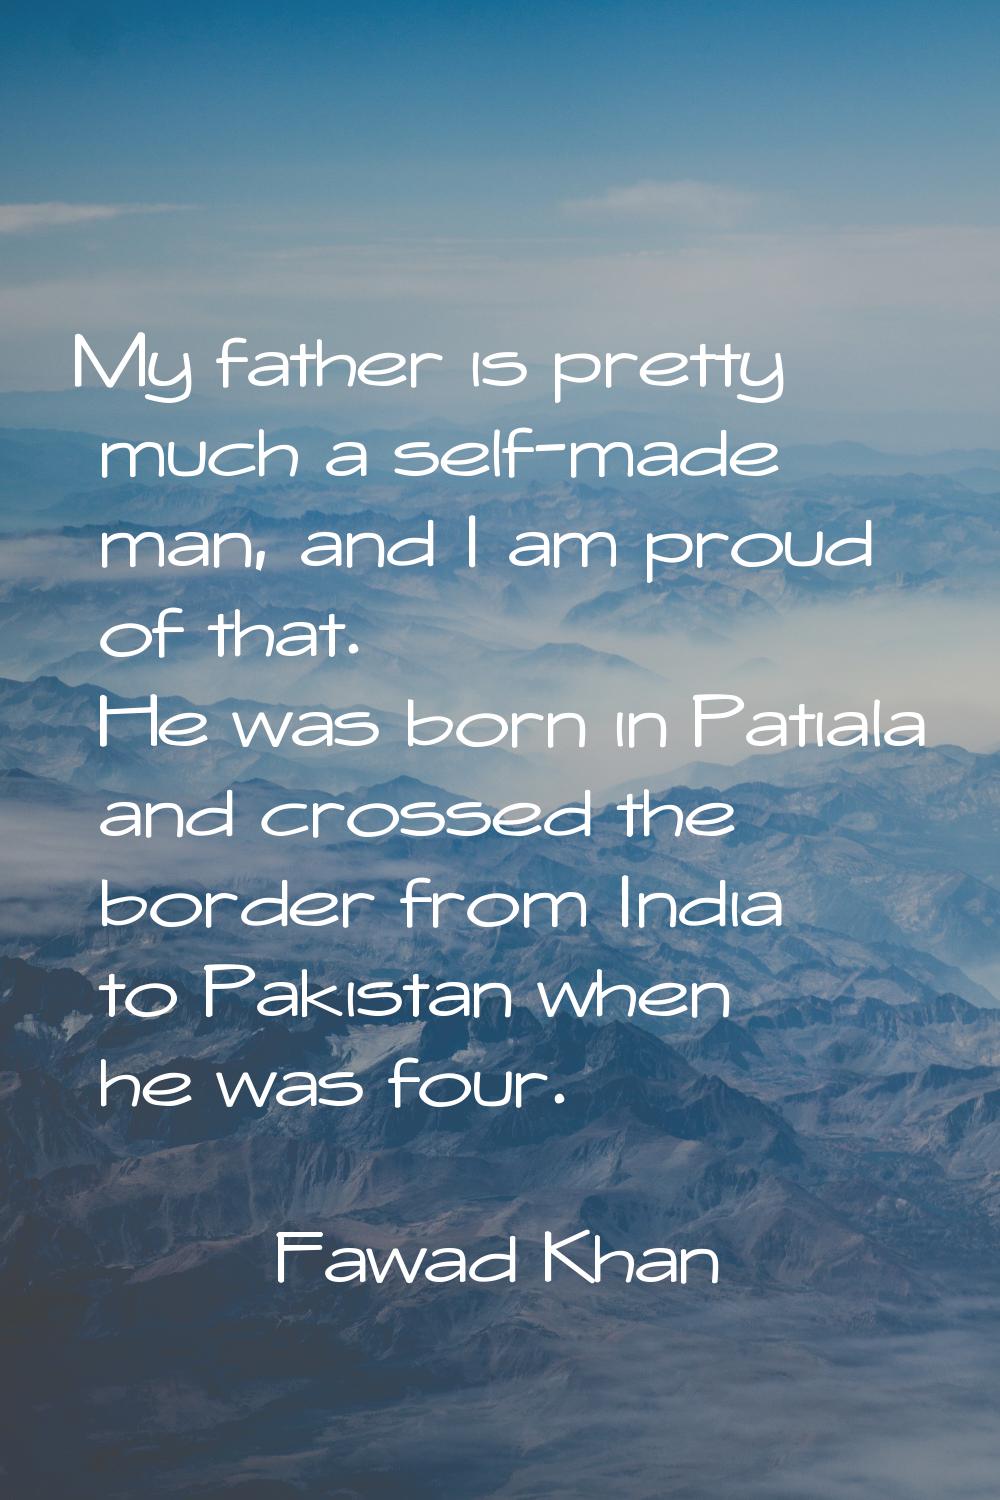 My father is pretty much a self-made man, and I am proud of that. He was born in Patiala and crosse